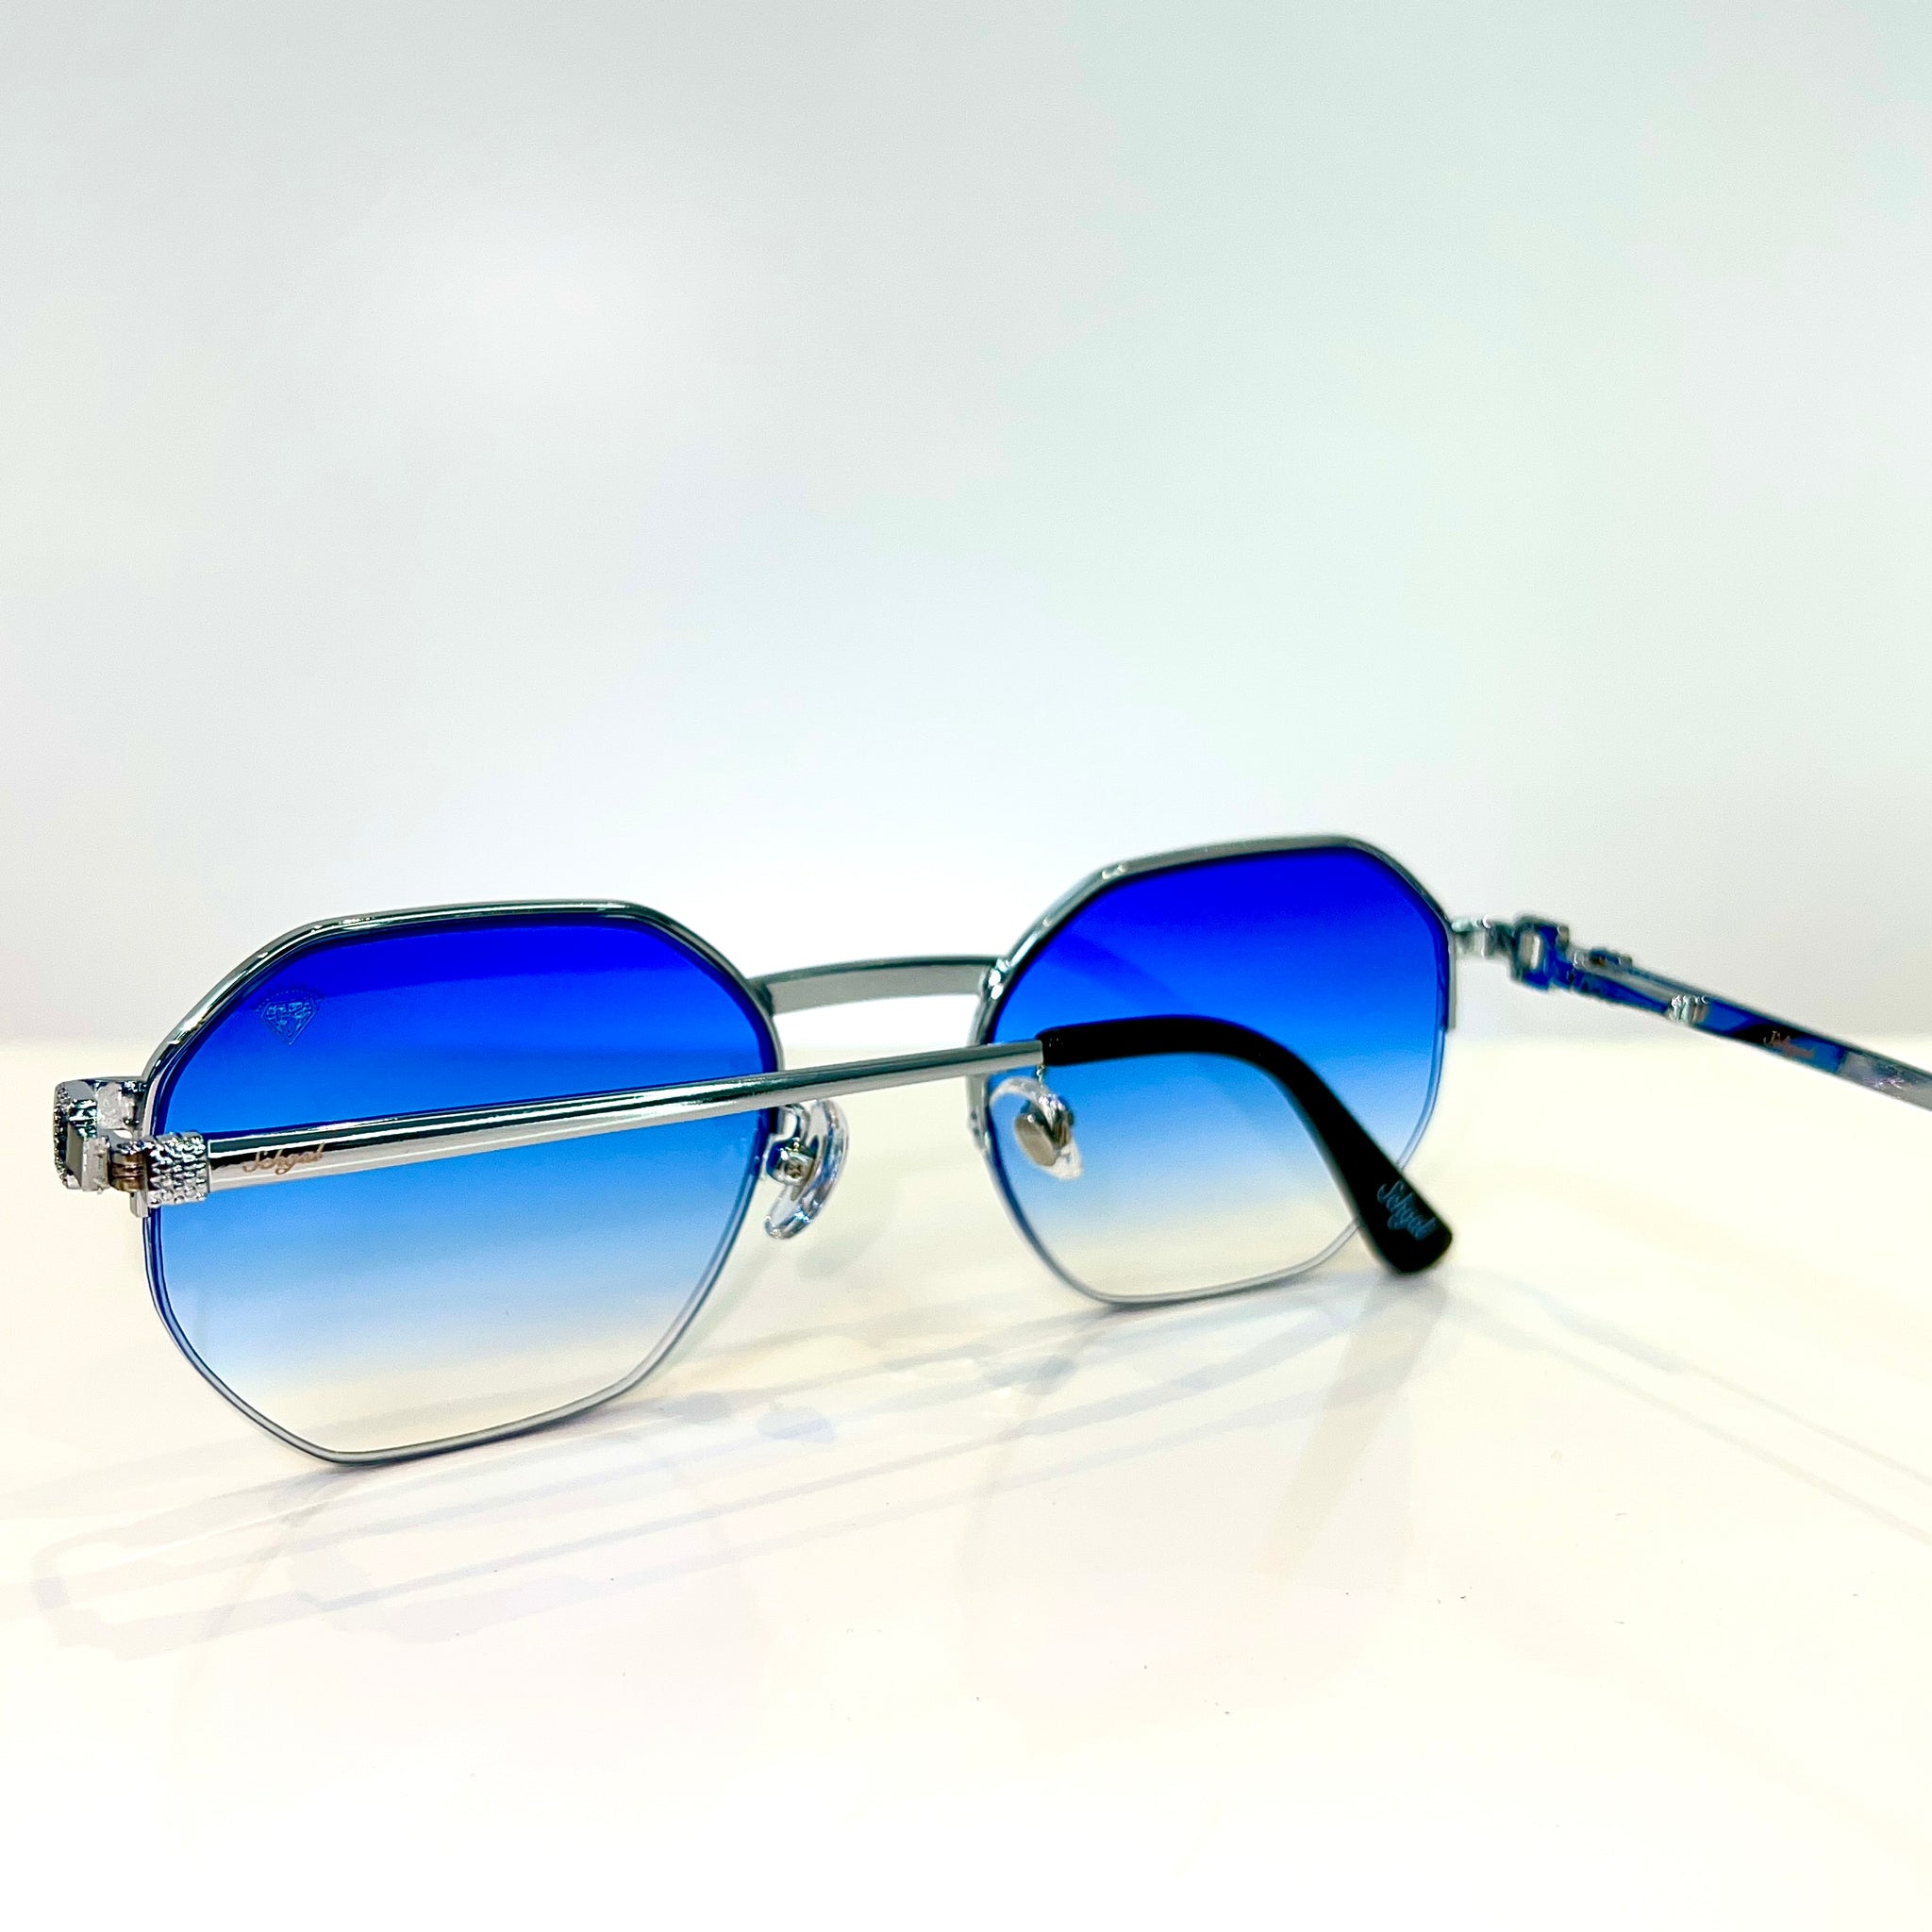 Los Angeles Glasses - 14 carat gold plated -  Blue Shade